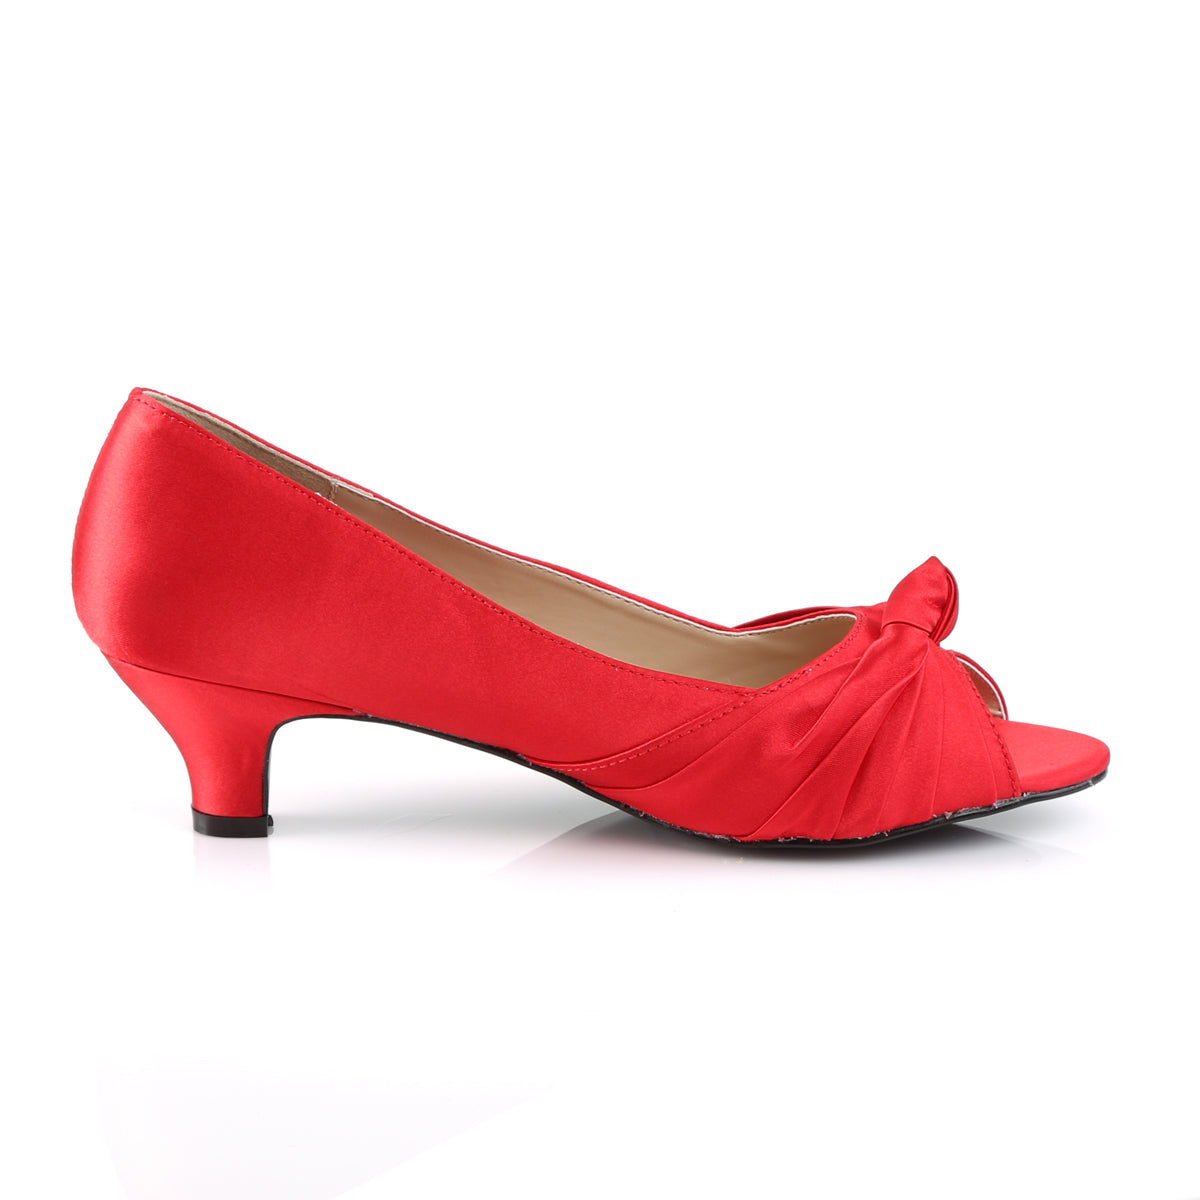 Pleaser Pink Label Womens Pumps FAB-422 Red Satin